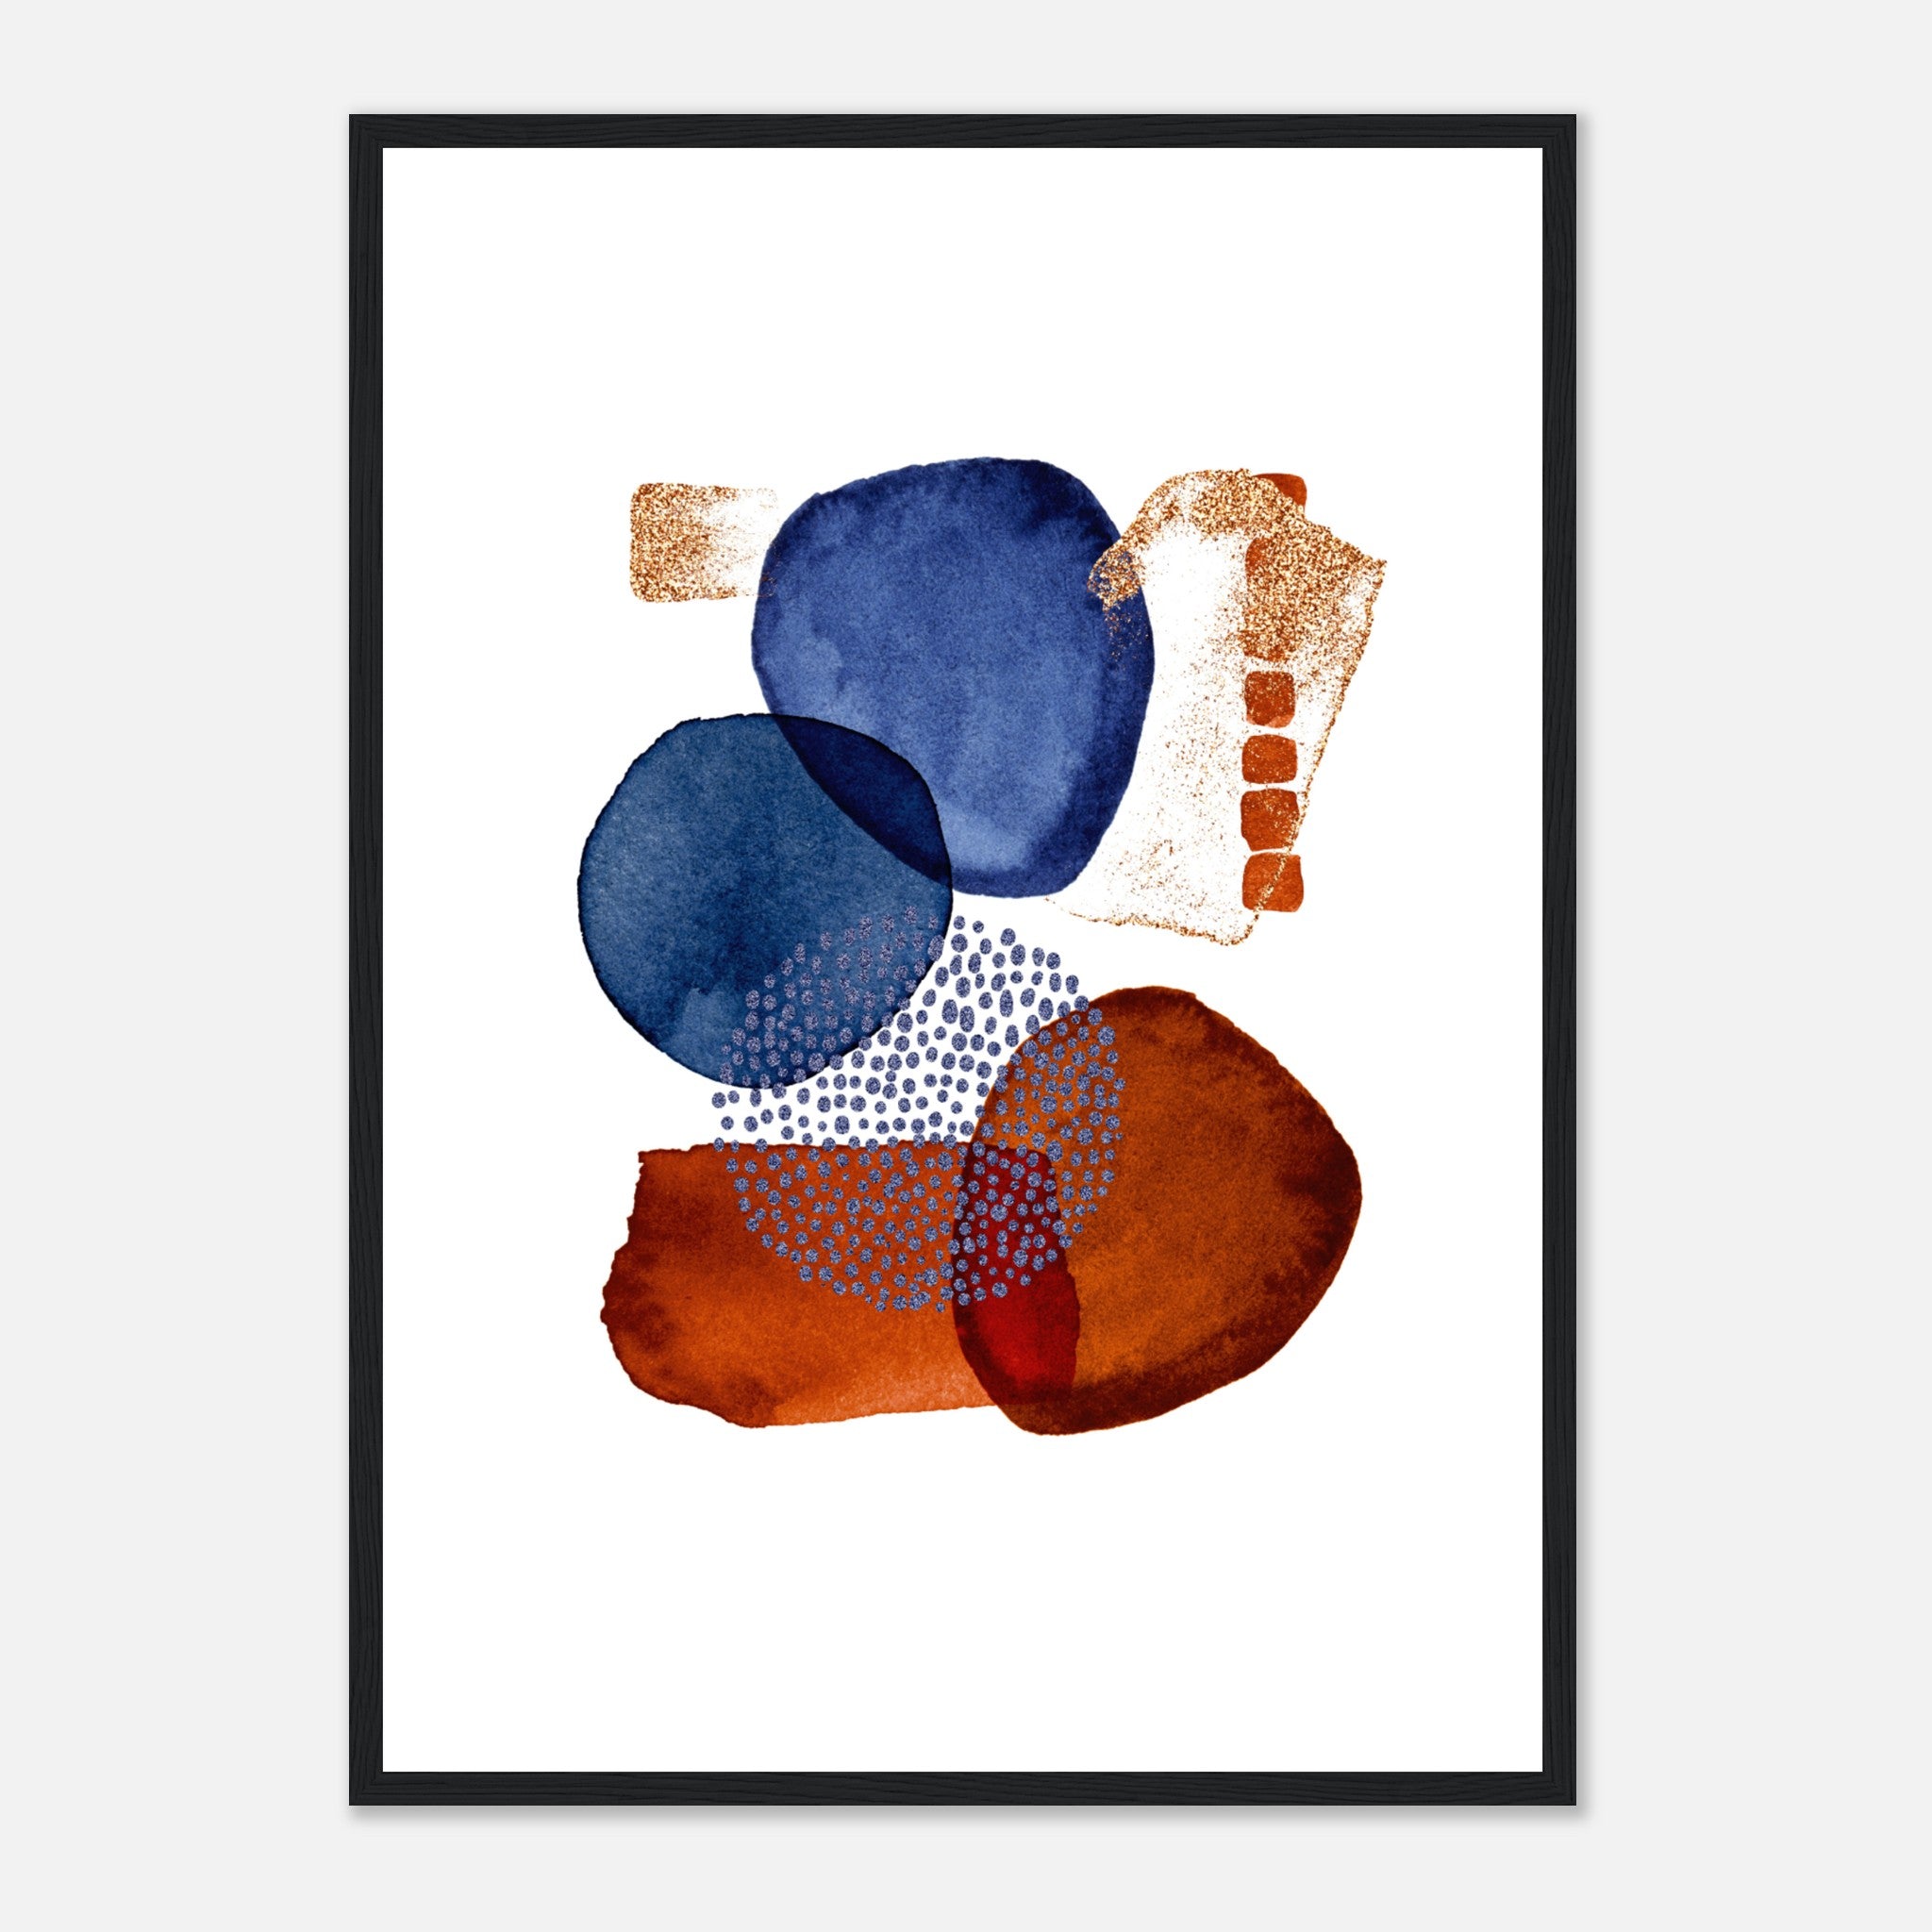 Abstract Watercolor Shapes 2 Poster